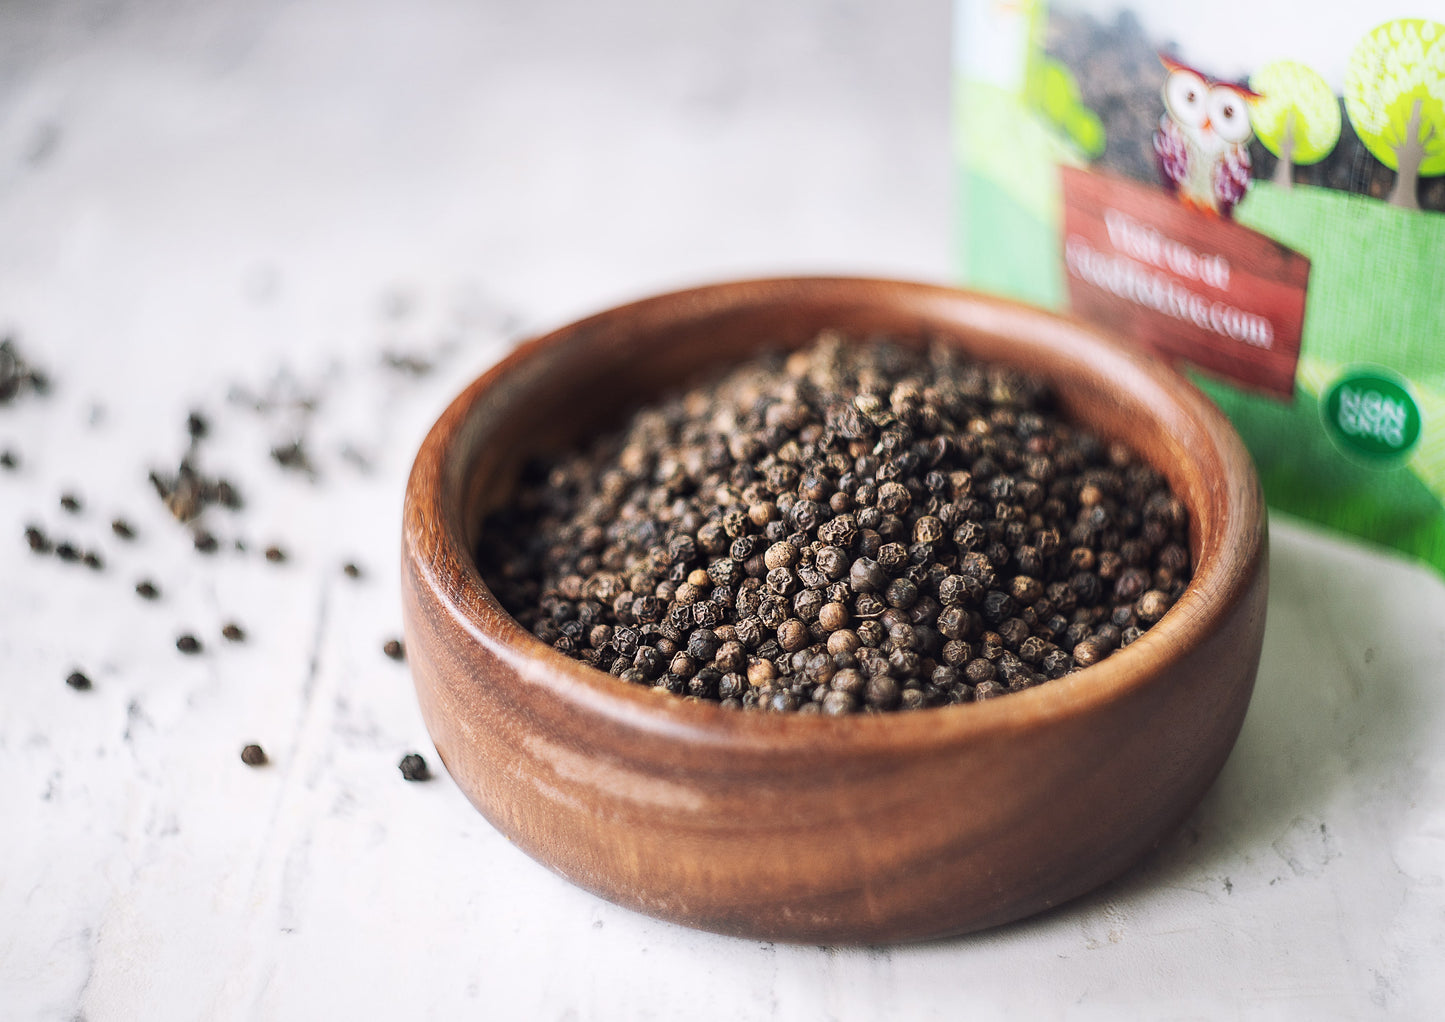 Organic Black Pepper - Whole Dried Peppercorns, Non-GMO, Kosher, Vegan, Bulk, Great for Spicing and Seasoning - by Food to Live